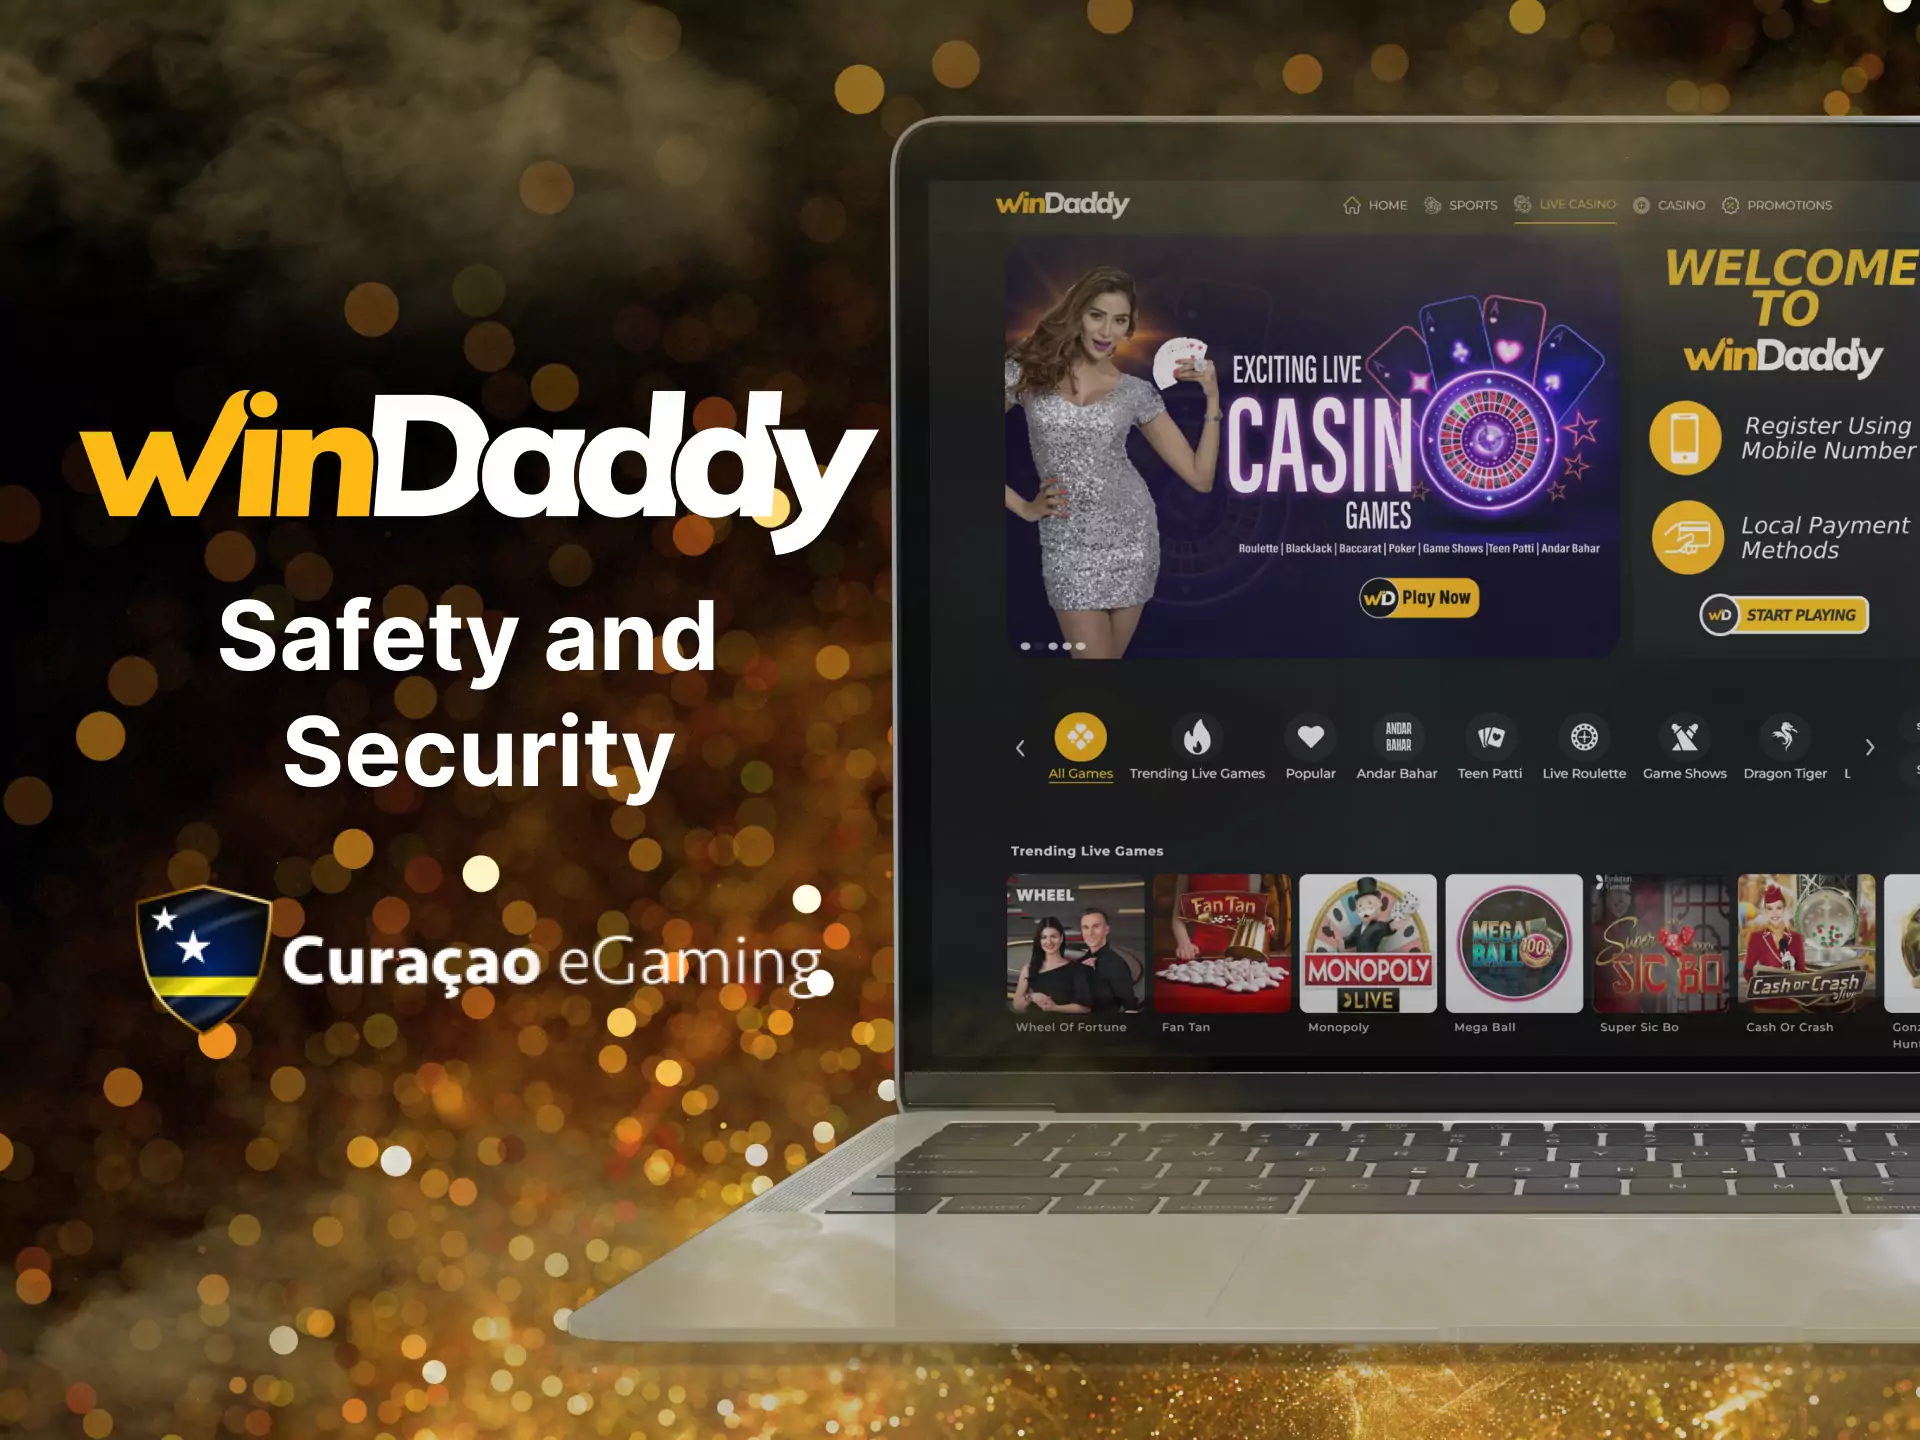 The Windaddy platform is completely safe and legal for players.